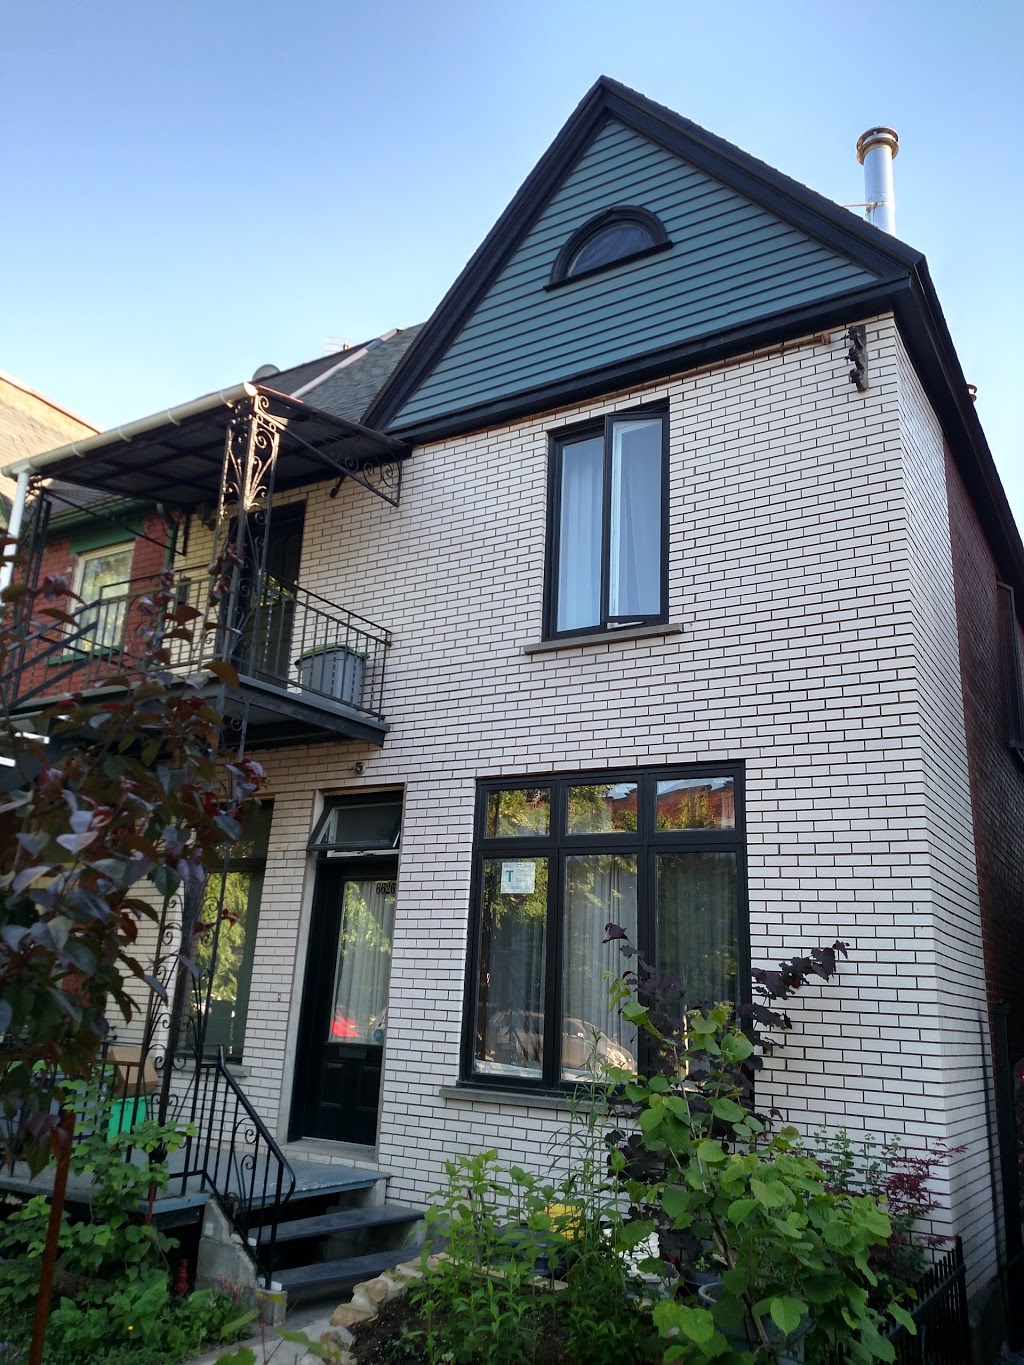 Montreal vacation rental : Chez Patrac | lodging | 6624 Ave Christophe-Colomb, Montreal, QC H2S 2G8, Canada | 5145288811 OR +1 514-528-8811